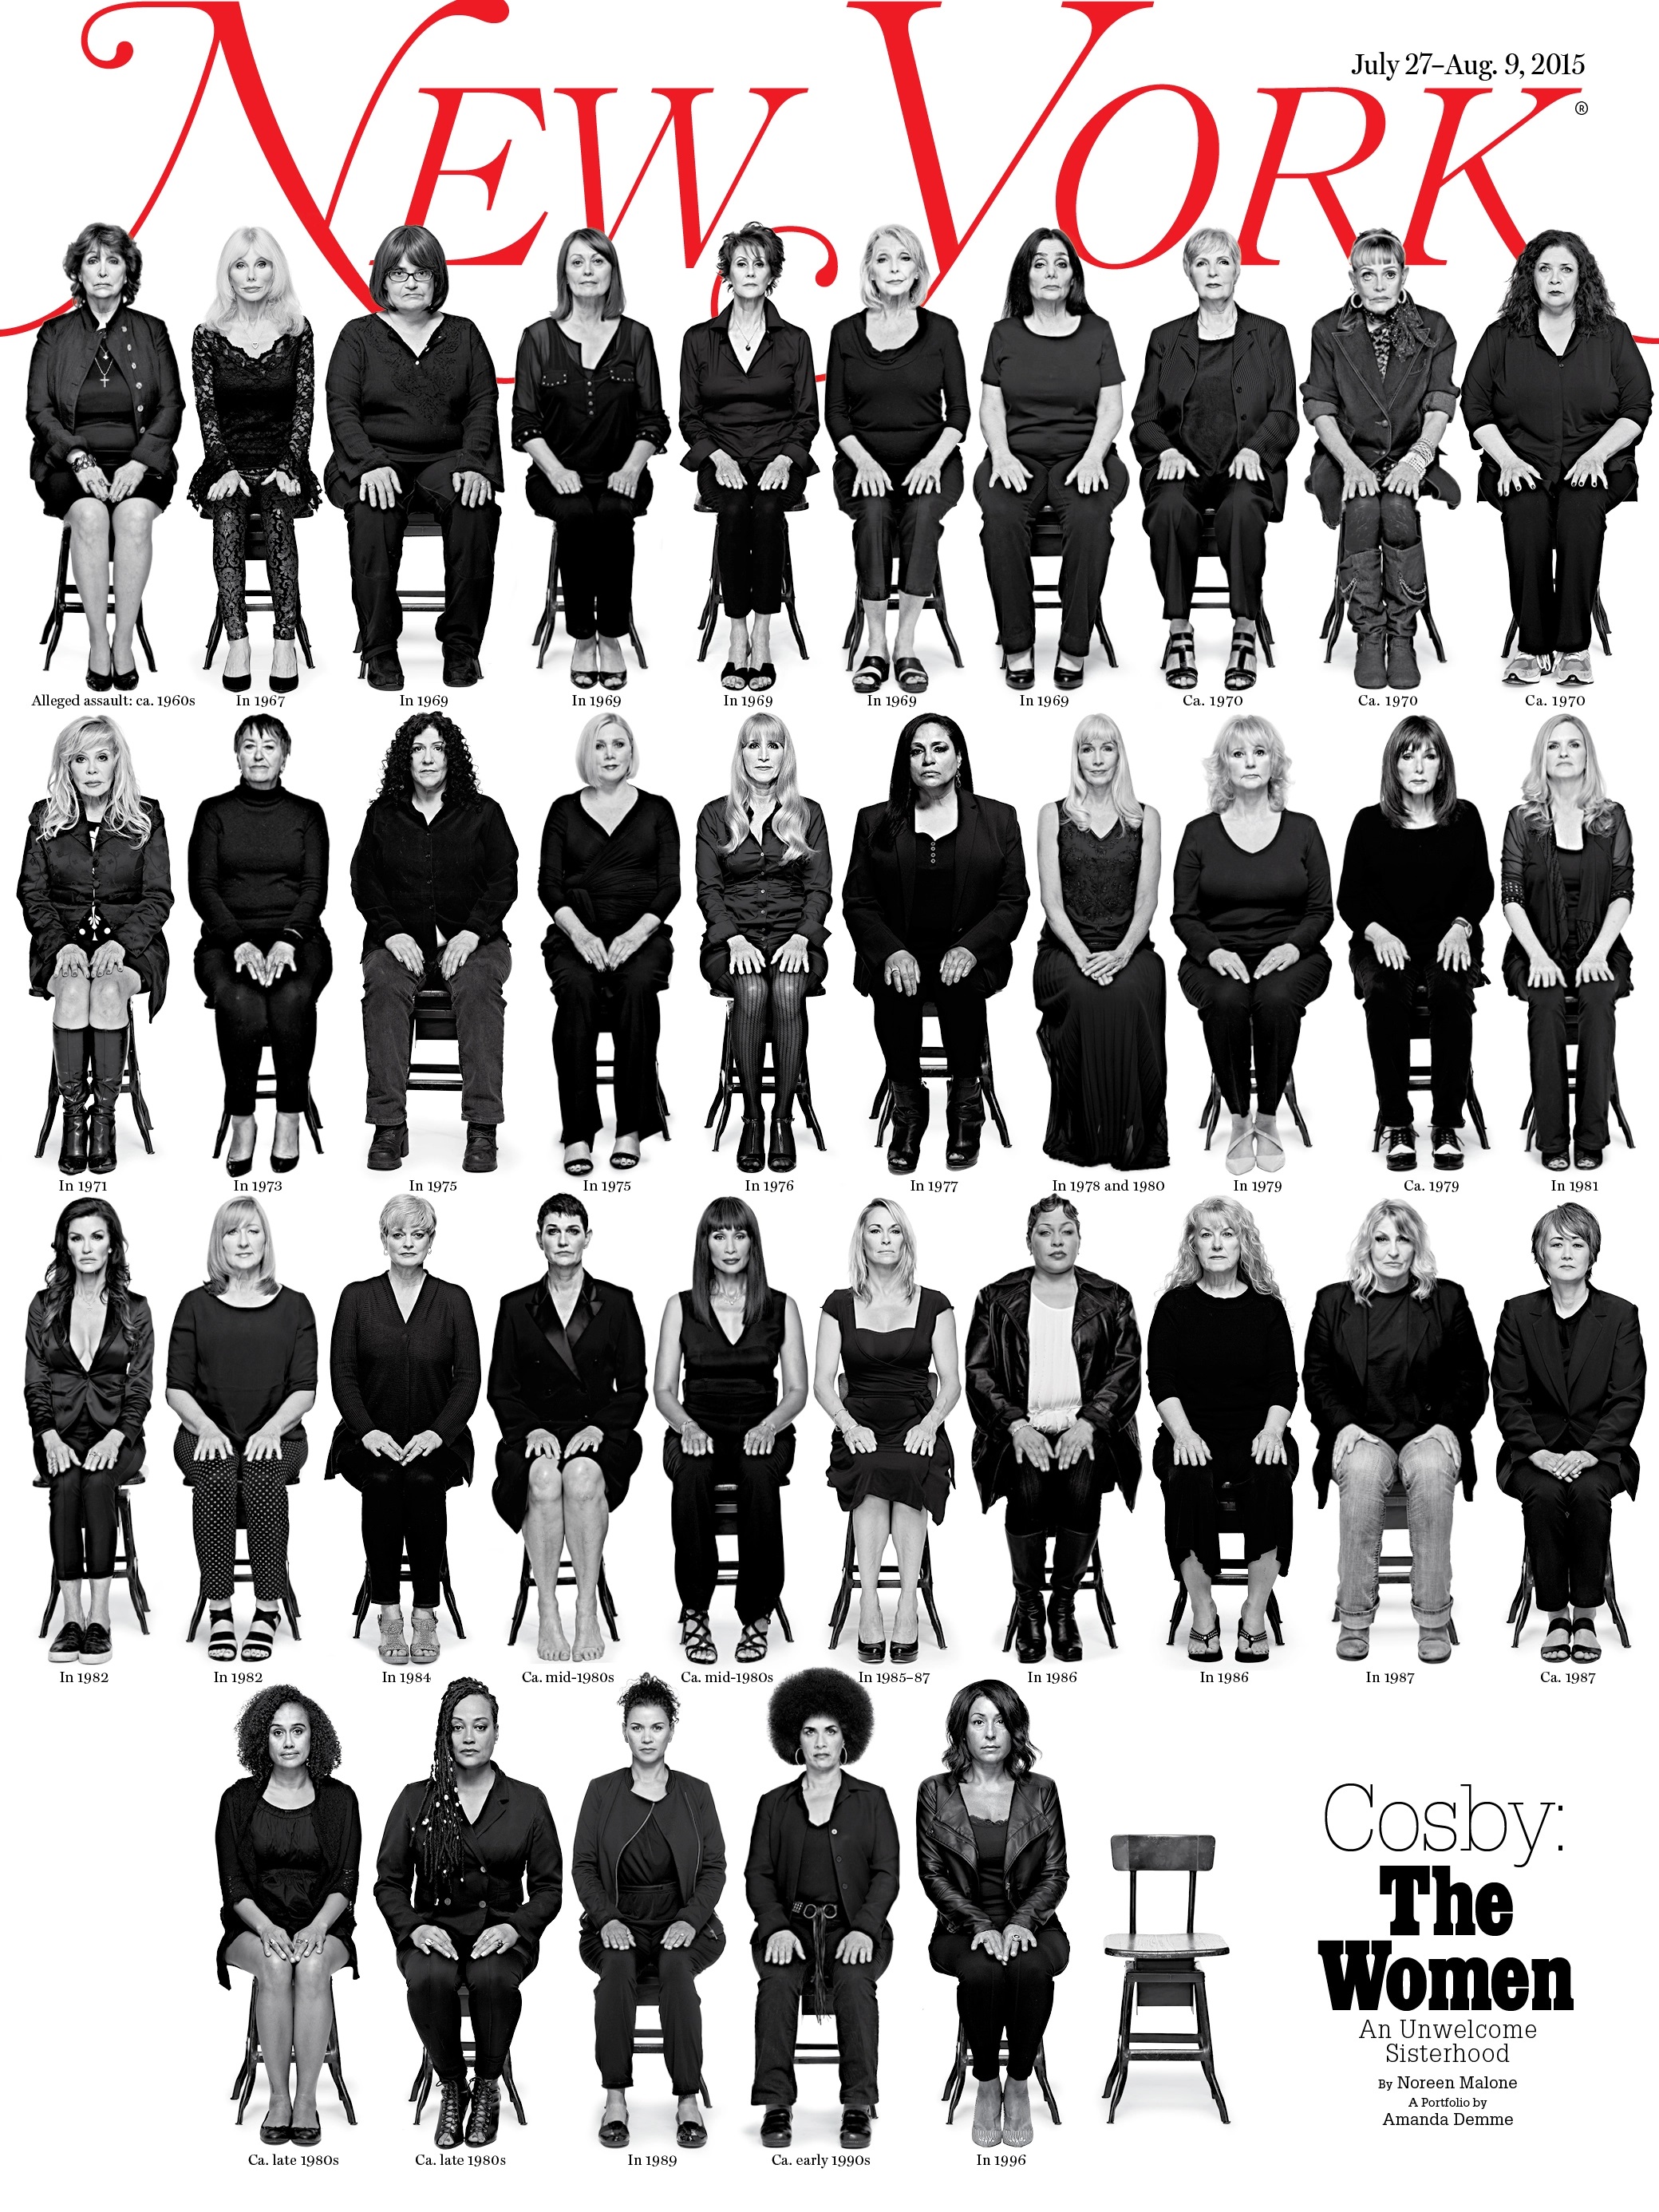 New York-"Cosby: The Women," July 27–August 9